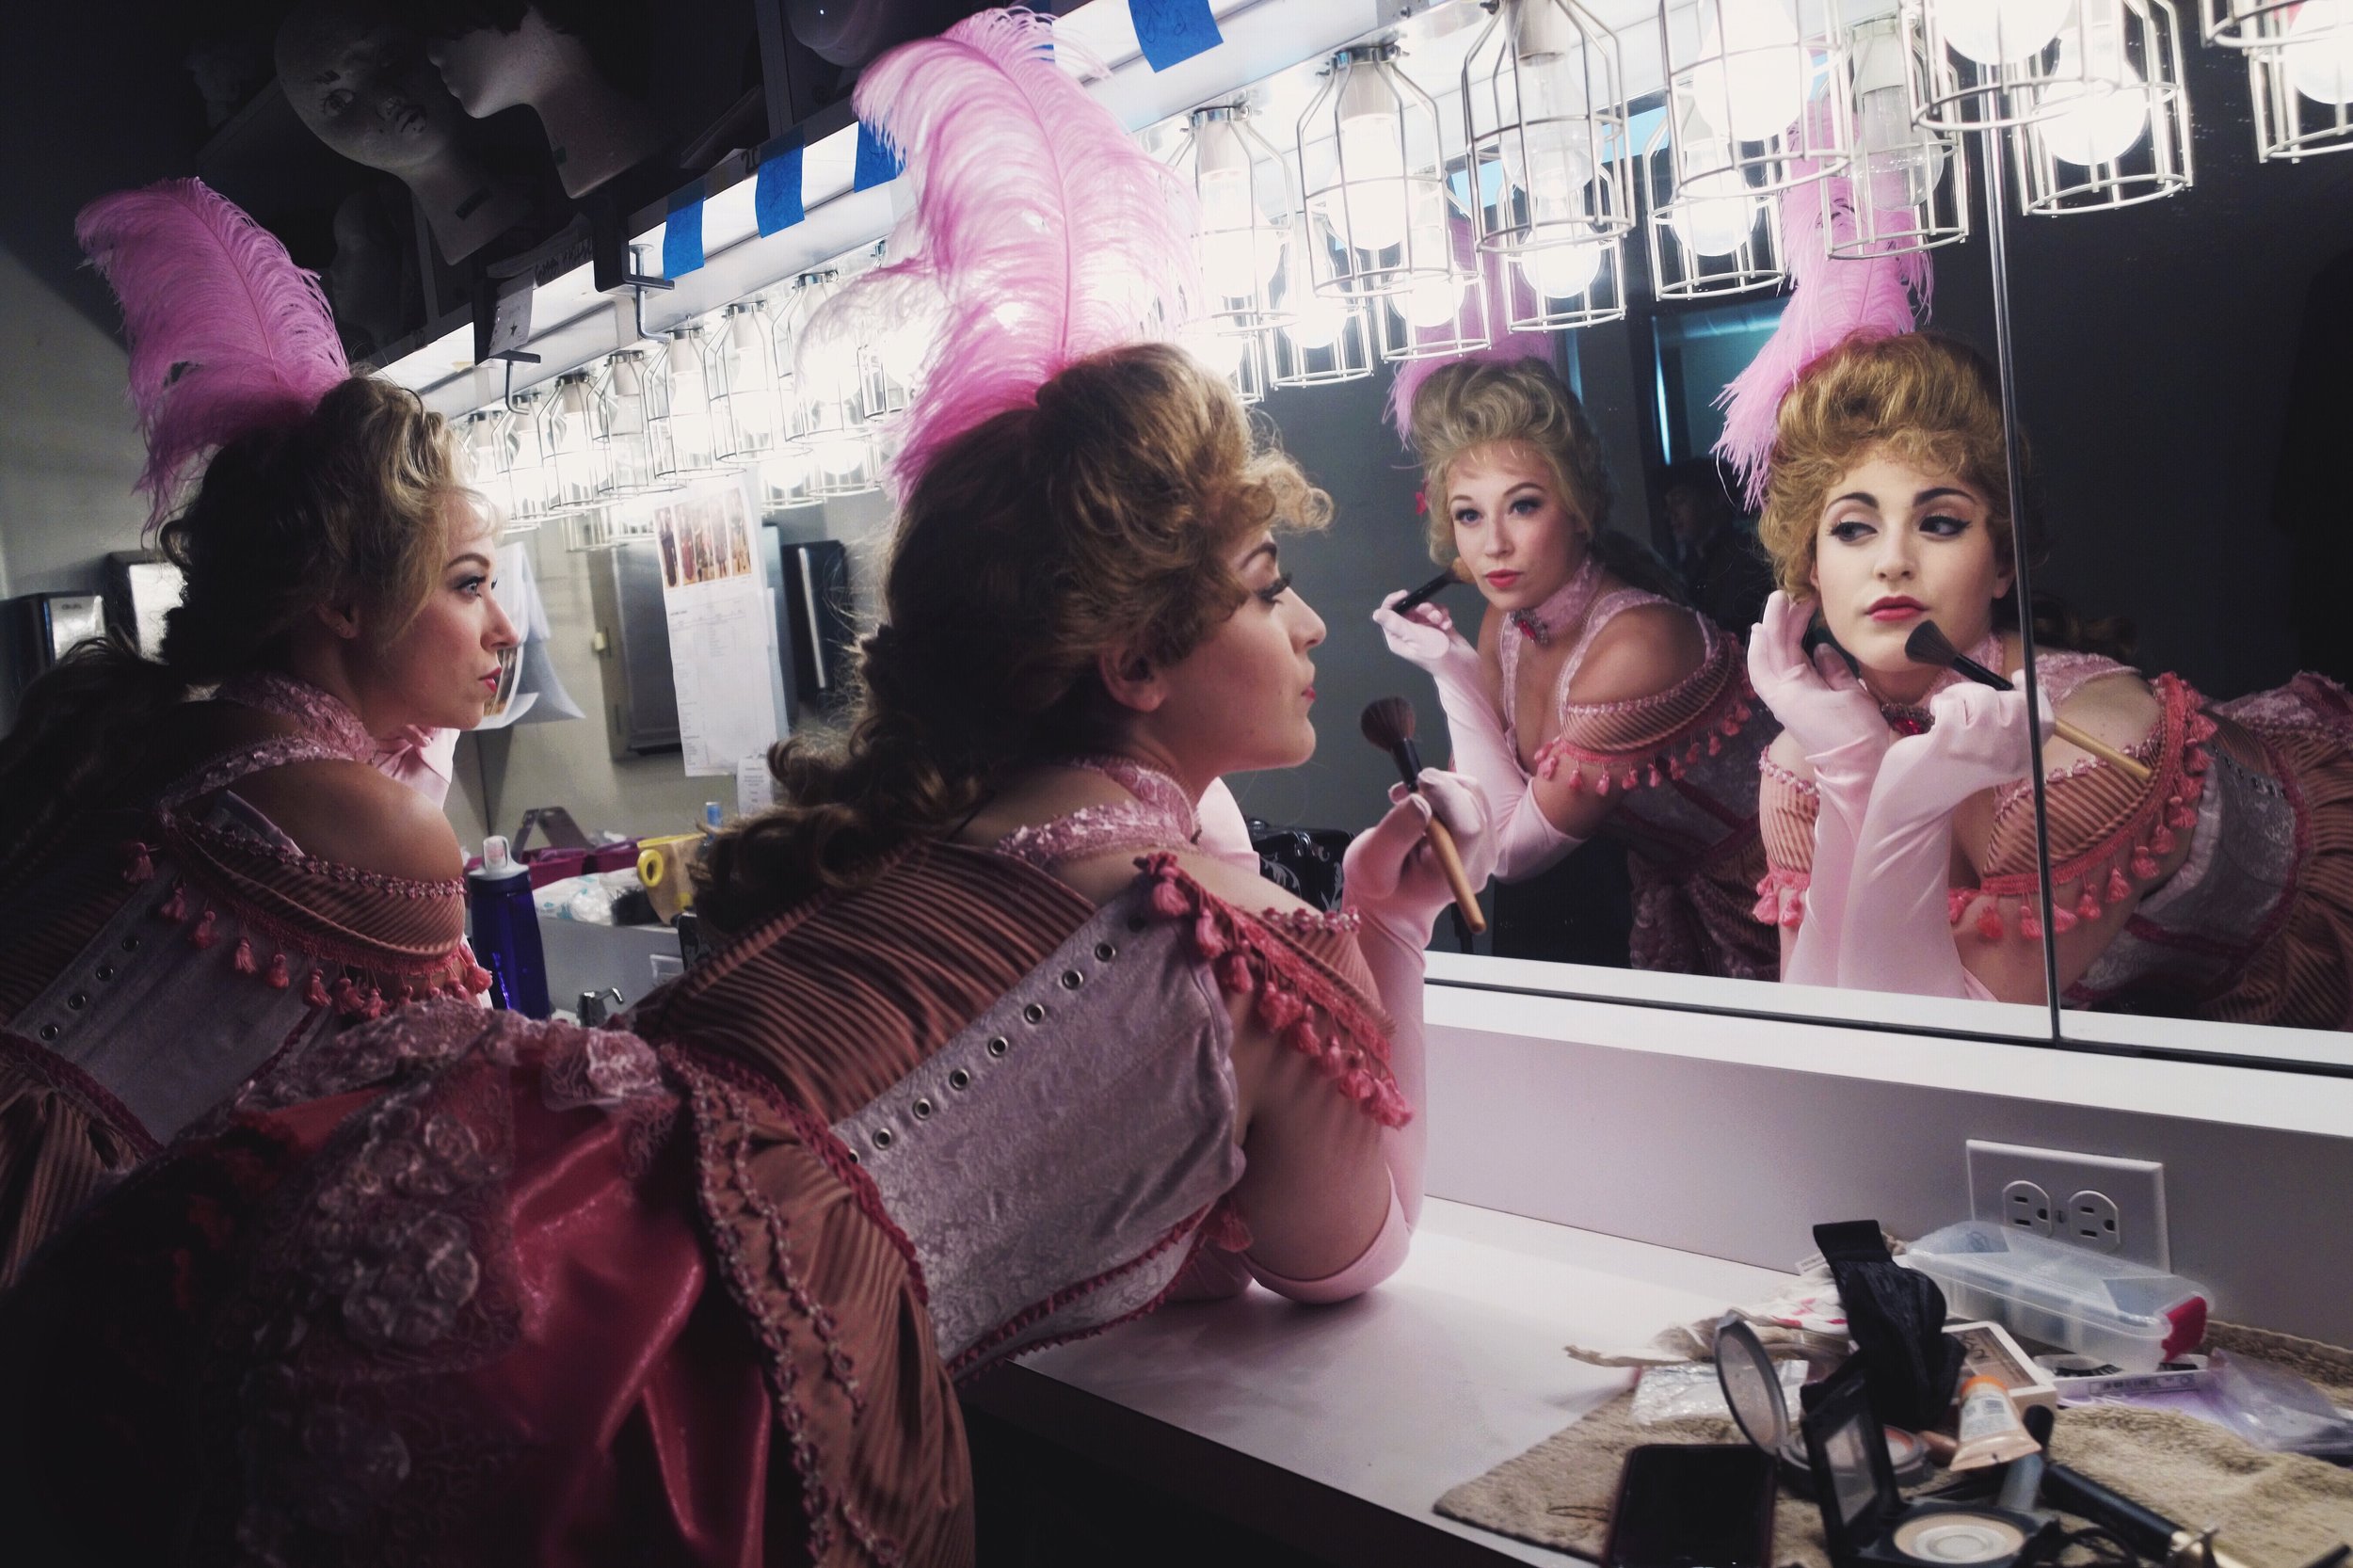  Backstage at the Fulton Theatre, the Bowery Beauties are making finishing touches before their burlesque act! "Disney's NEWSIES" June/July 2017. 